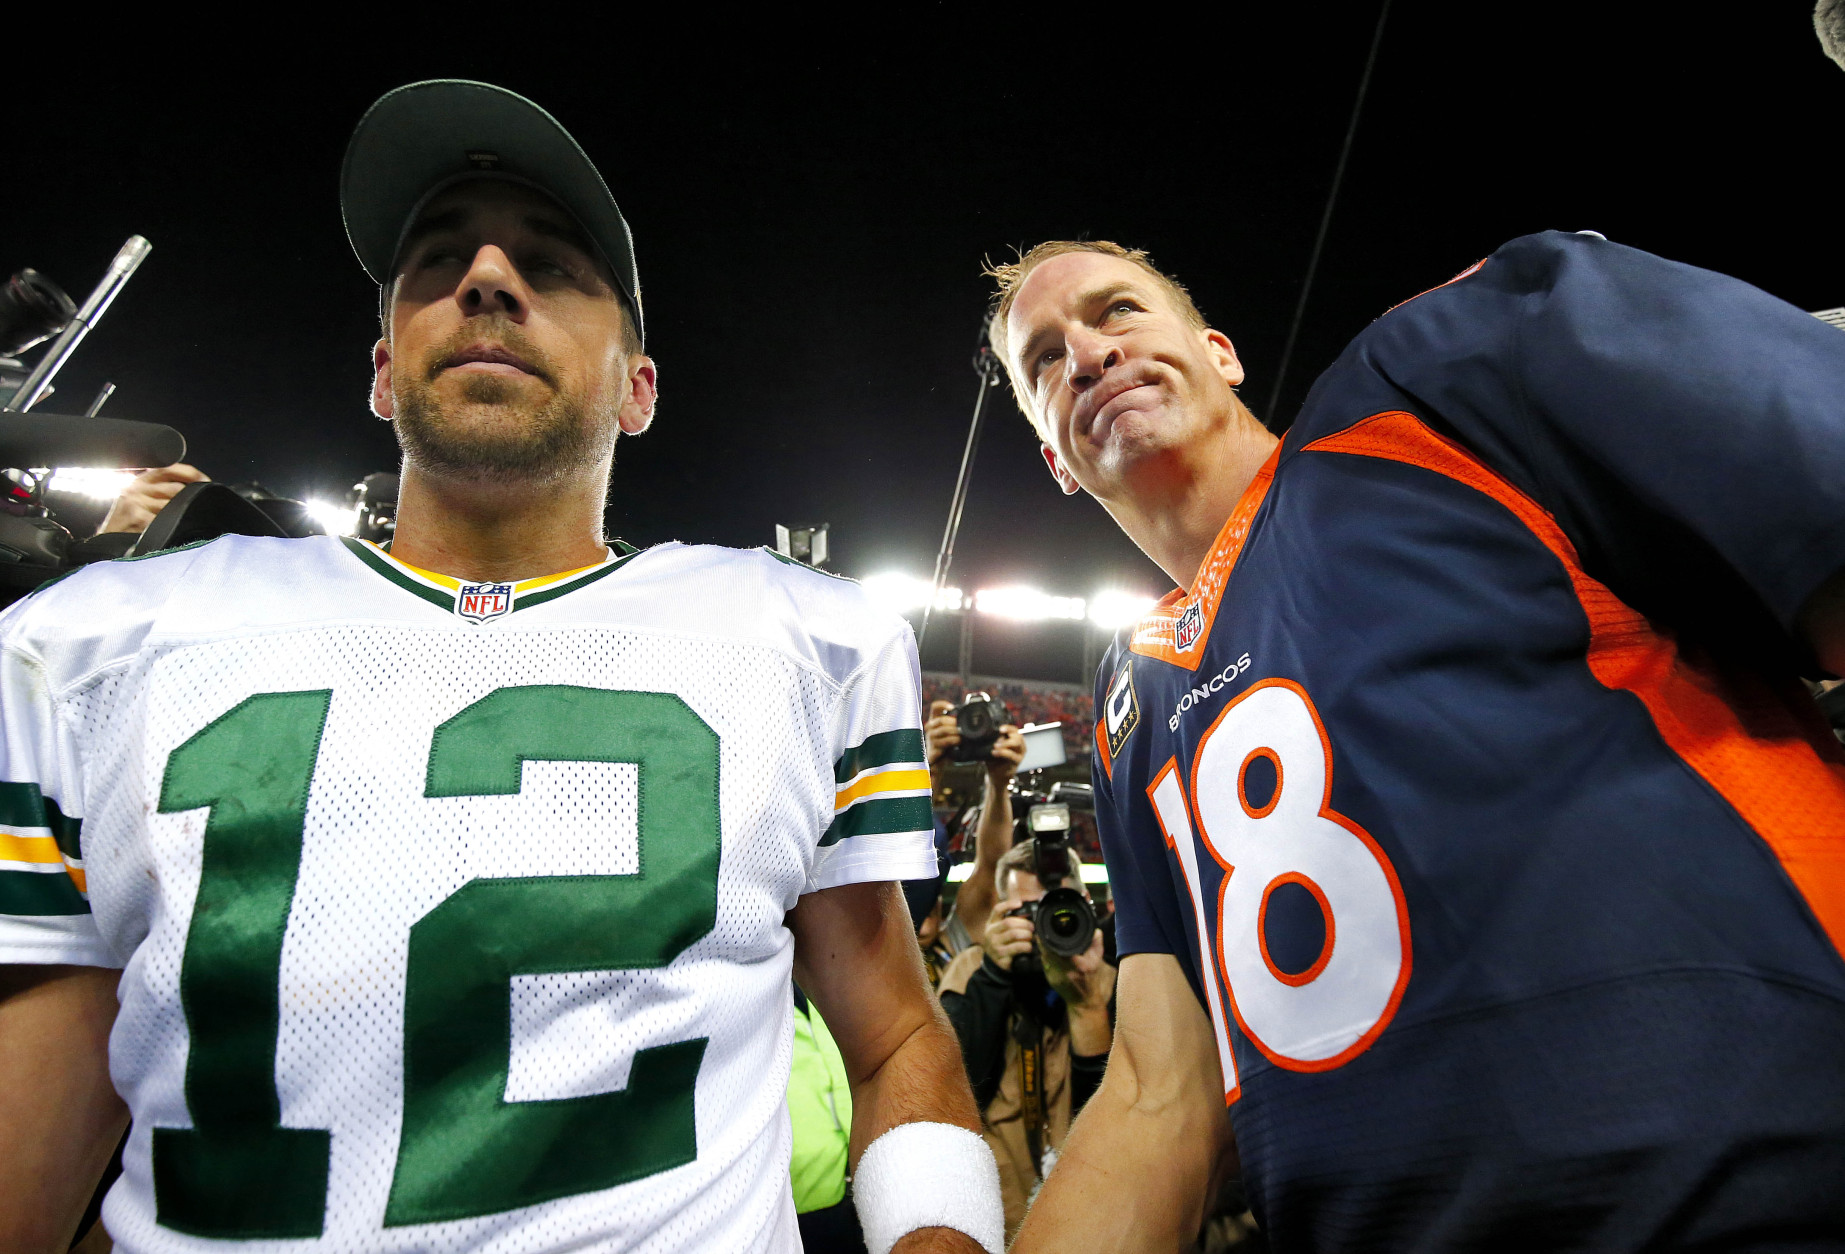 Denver Broncos quarterback Peyton Manning (18) and Green Bay Packers quarterback Aaron Rodgers (12) meet at midfield after an NFL football game, Sunday, Nov. 1, 2015, in Denver. The Broncos won 29-10 to improve to 7-0. (AP Photo/Jack Dempsey)